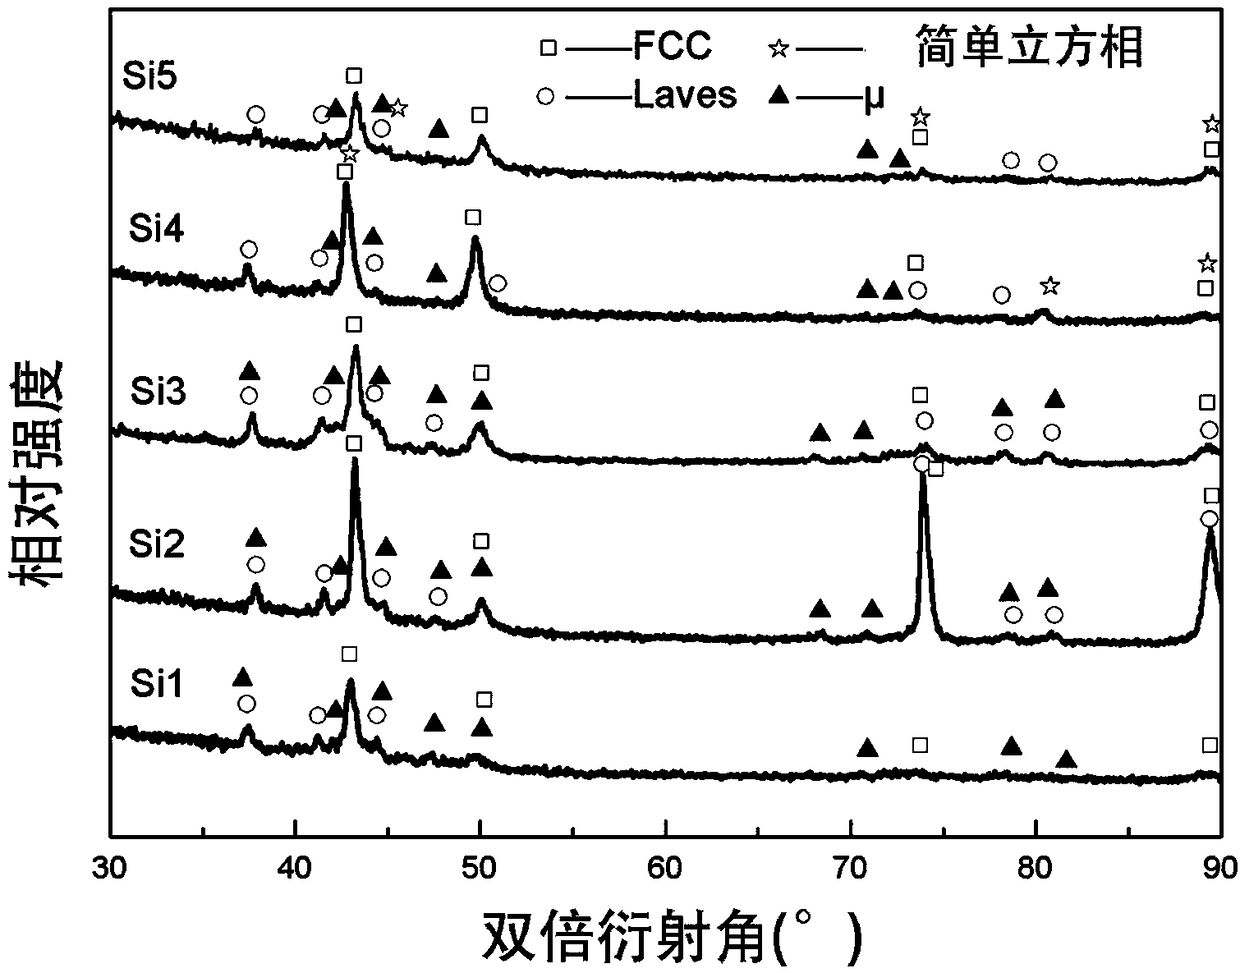 Five-element FeCoNiMoSi series high-entropy alloy and preparing method thereof